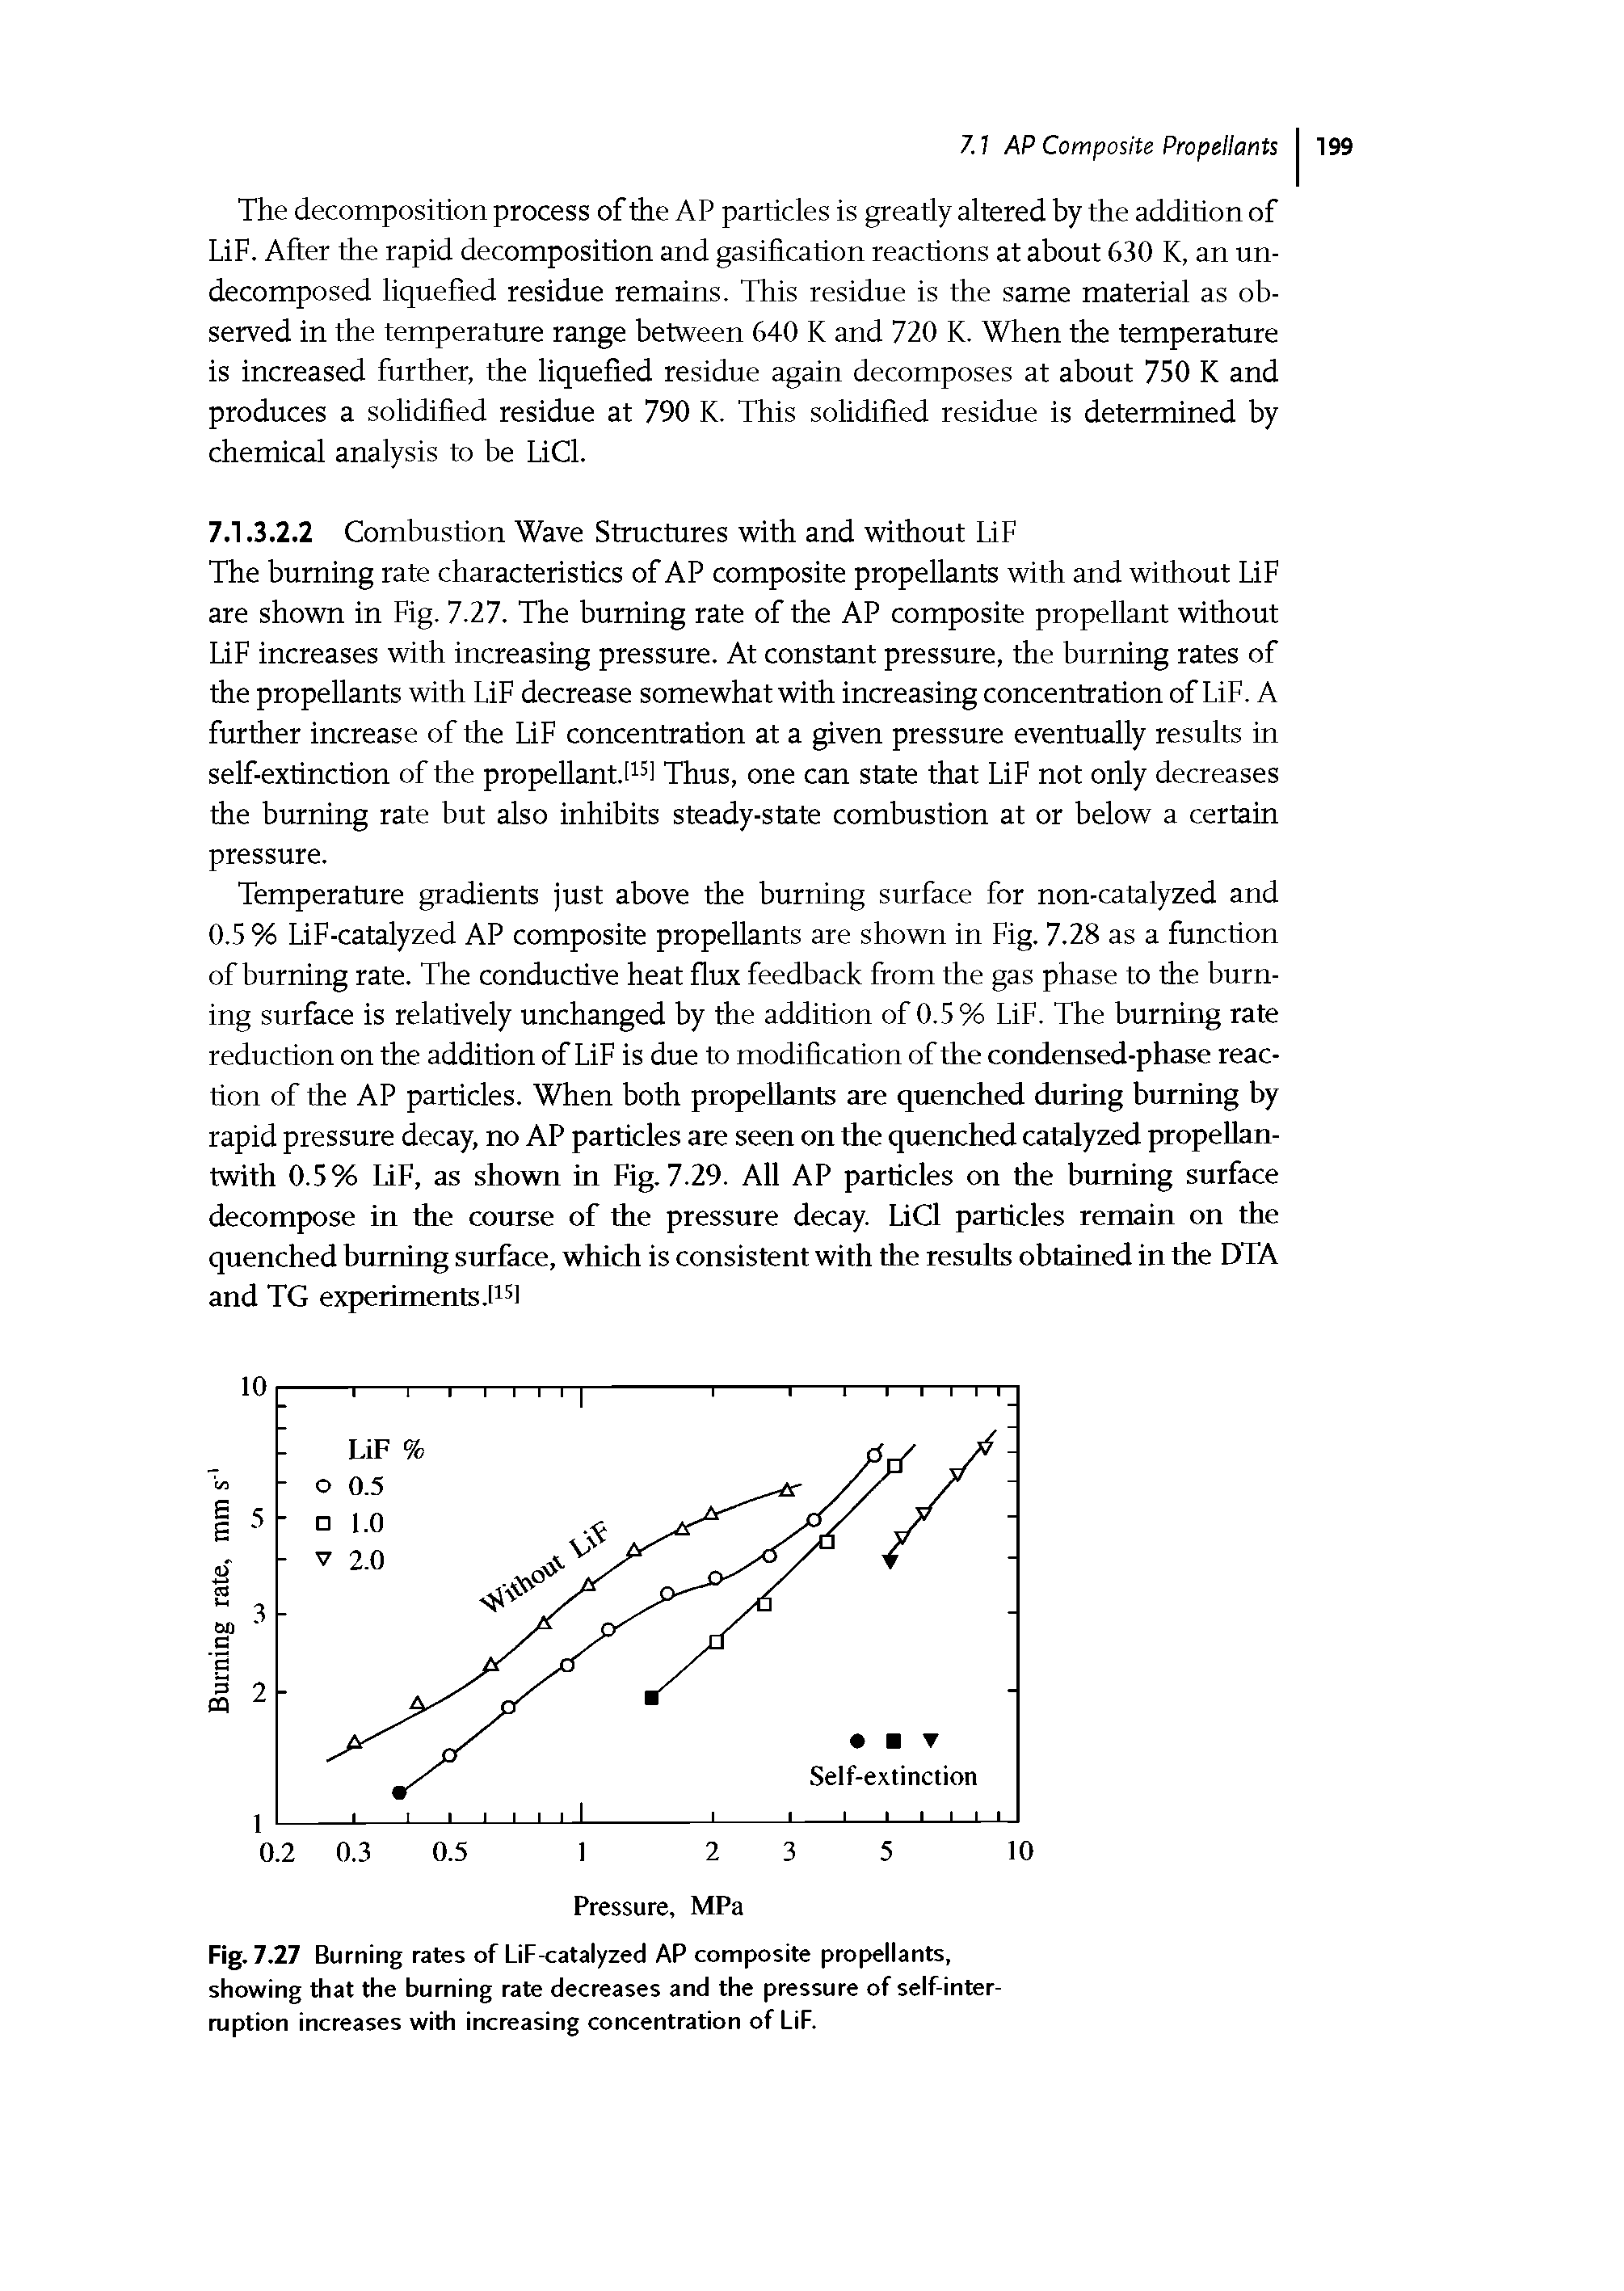 Fig. 7.27 Burning rates of LiF-catalyzed AP composite propellants, showing that the burning rate decreases and the pressure of self-inter-mption increases with increasing concentration of LiF.